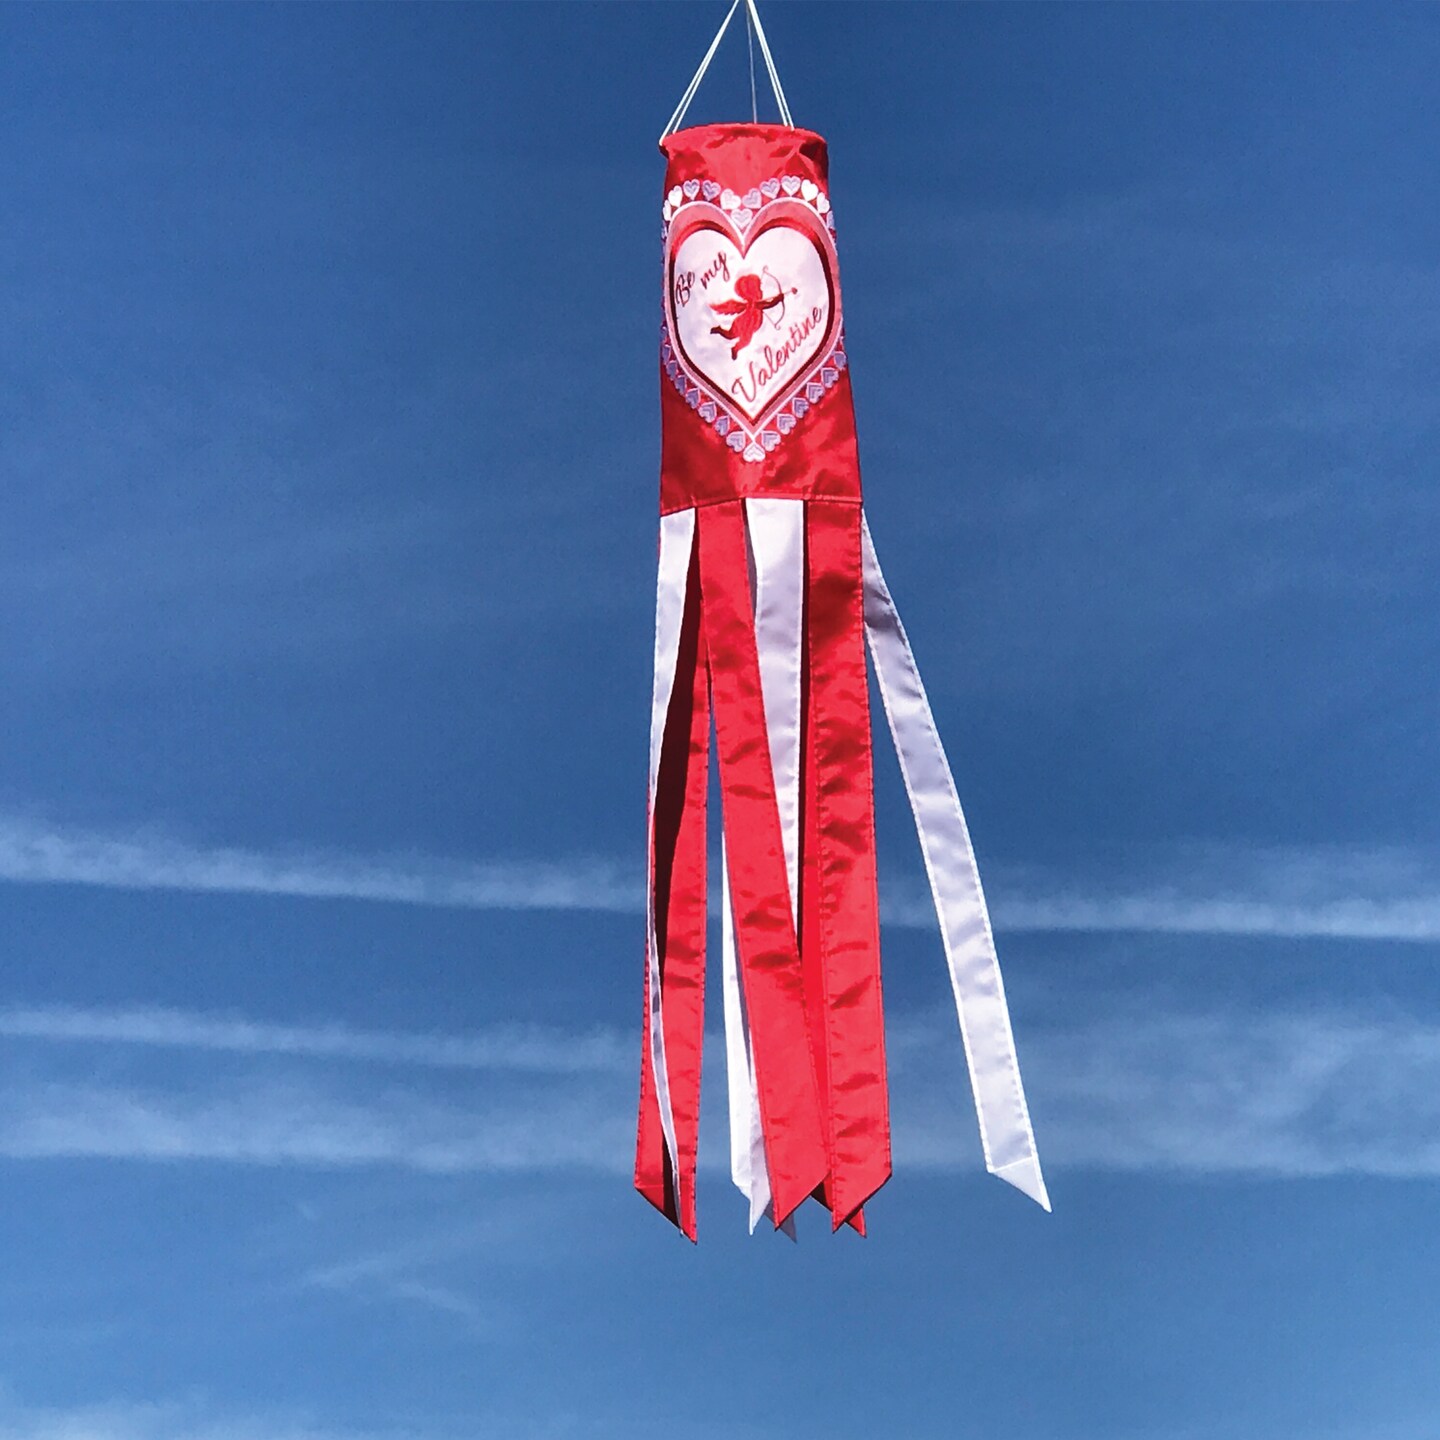 In the Breeze 5129 Be My Valentine 40 Inch Windsock - Outdoor Holiday Windsock